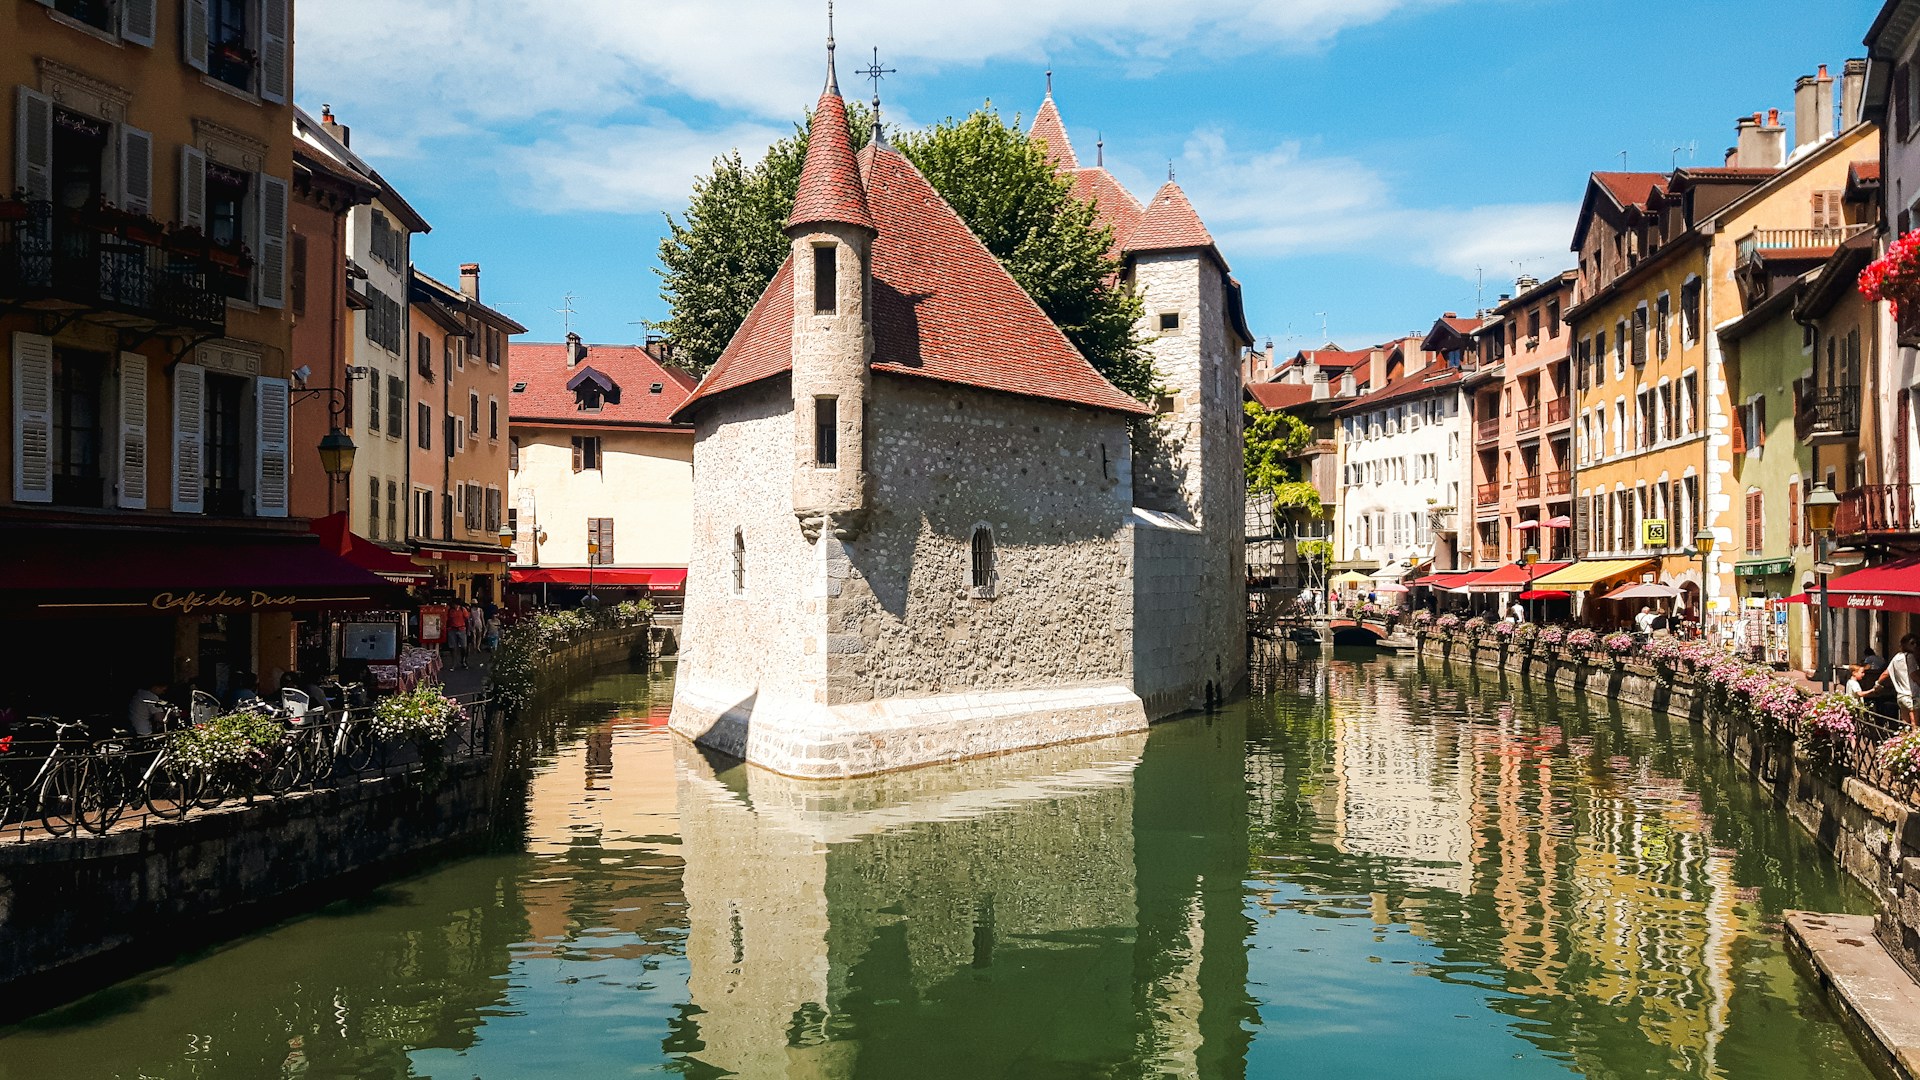 Medieval buildings amidst the canals of Annecy in France Photo Credit: Mathias Reding